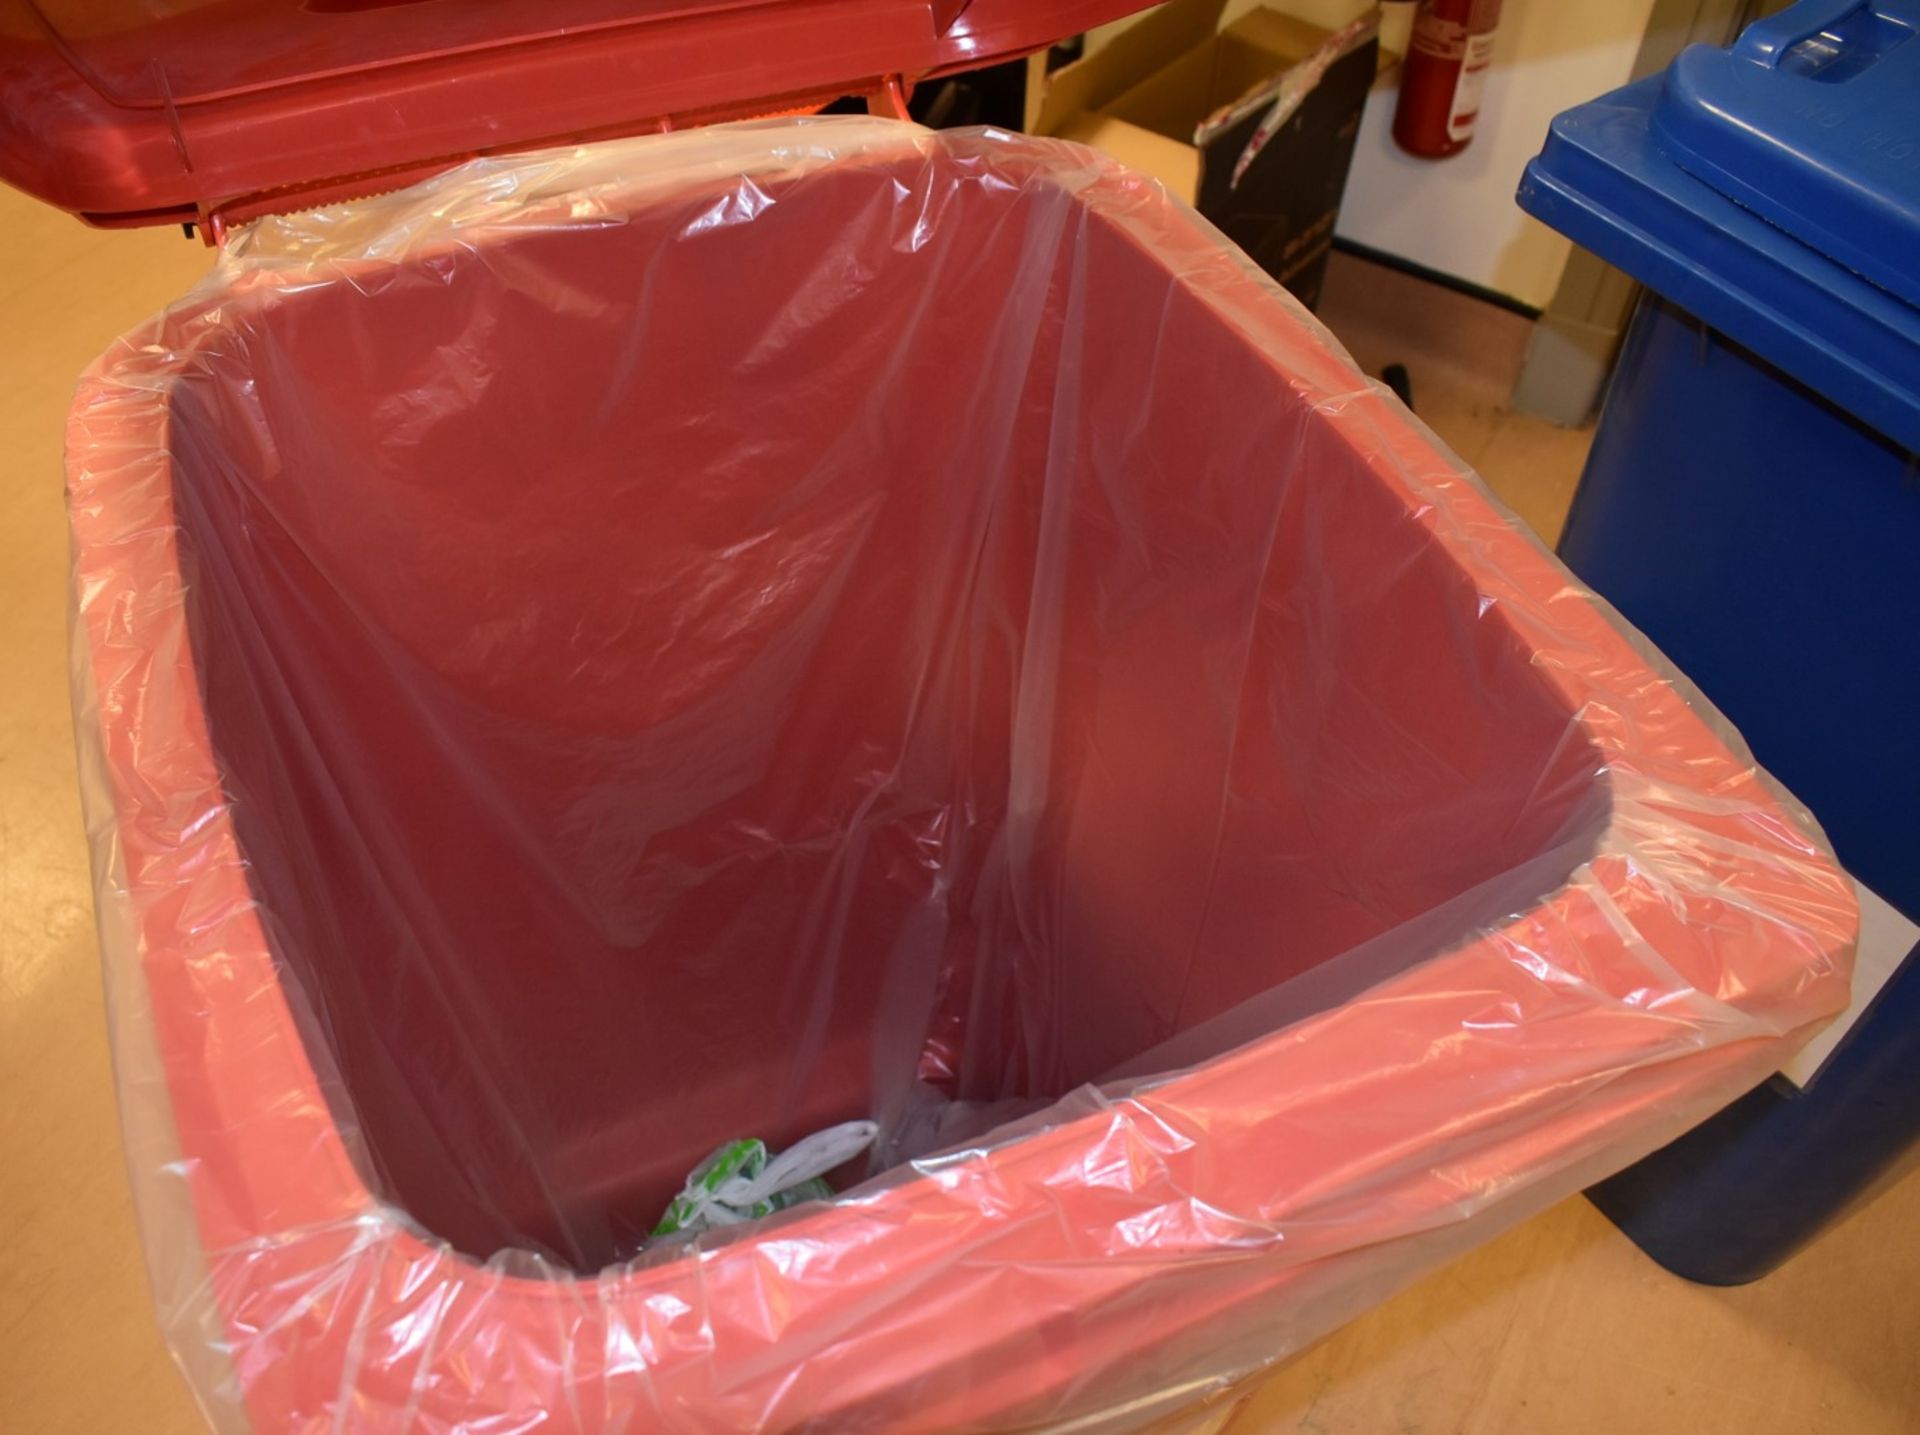 1 x Wheelie Waste Bin in Red - 240 Litre - Previously Used Indoors Only - Good Clean Condition - Image 2 of 2